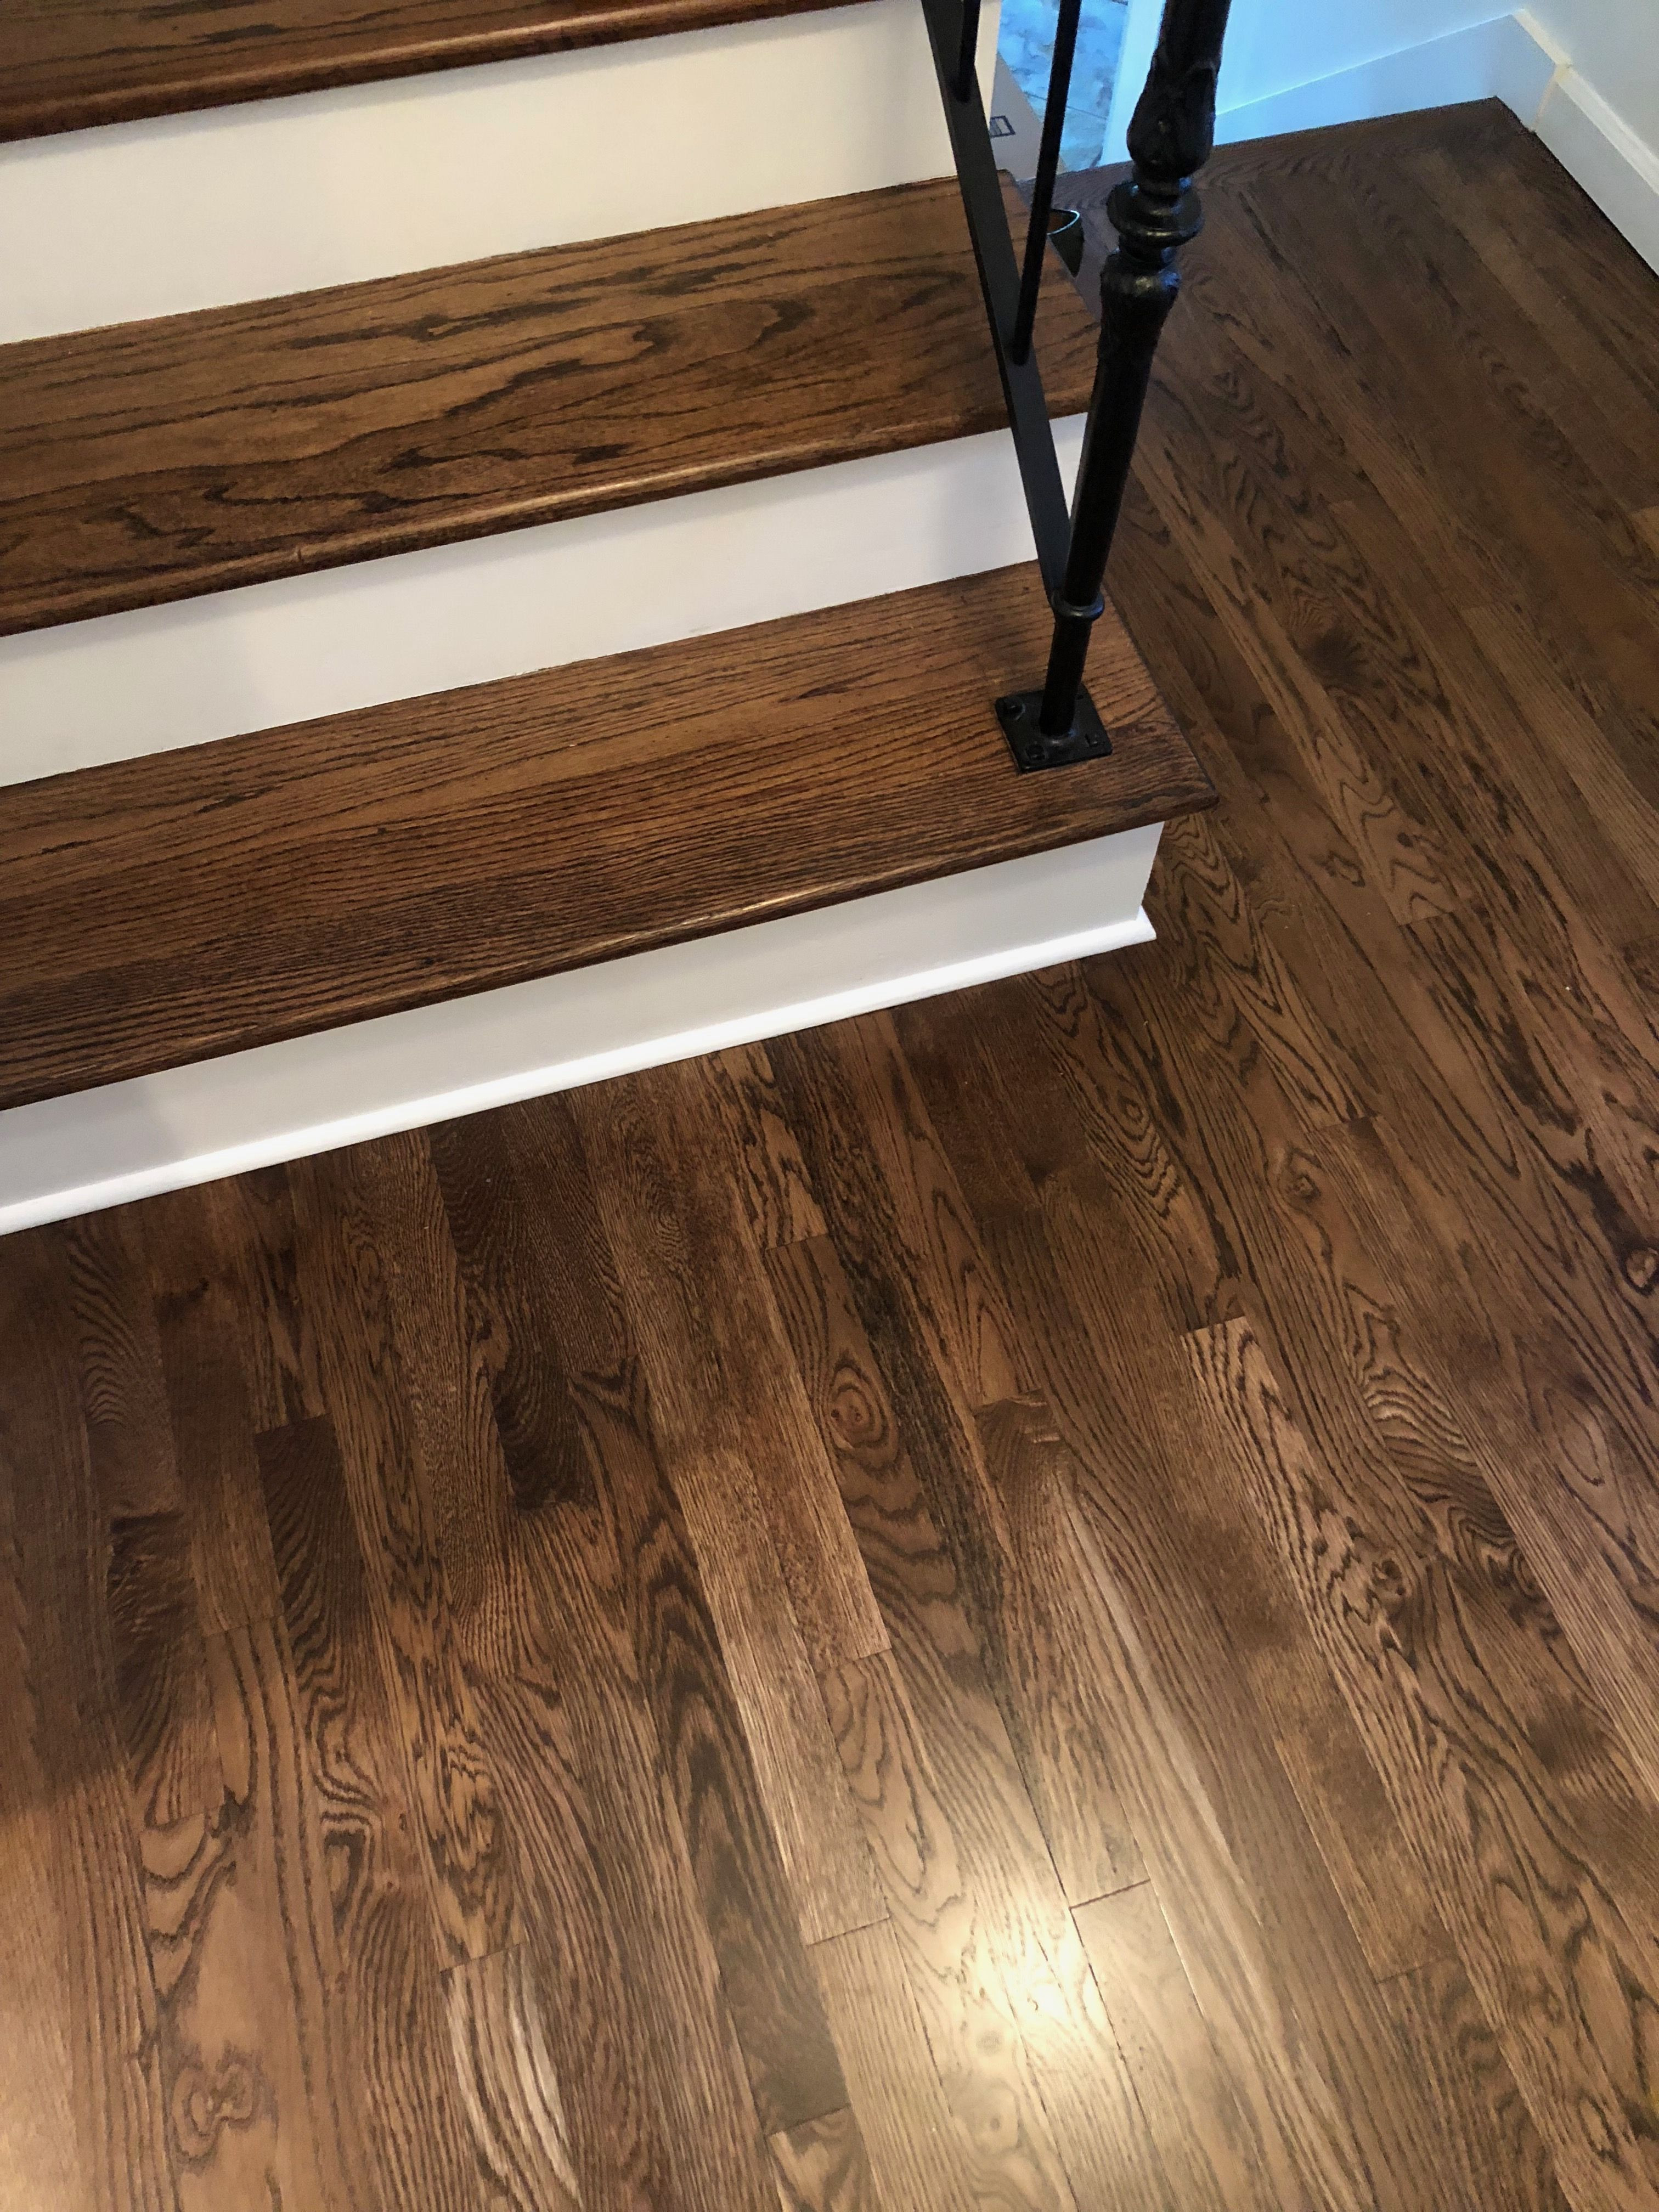 28 attractive Walnut Hardwood Flooring 2024 free download walnut hardwood flooring of duraseal dark walnut with satin finish floors are select white oak in duraseal dark walnut with satin finish floors are select white oak and stair tread is